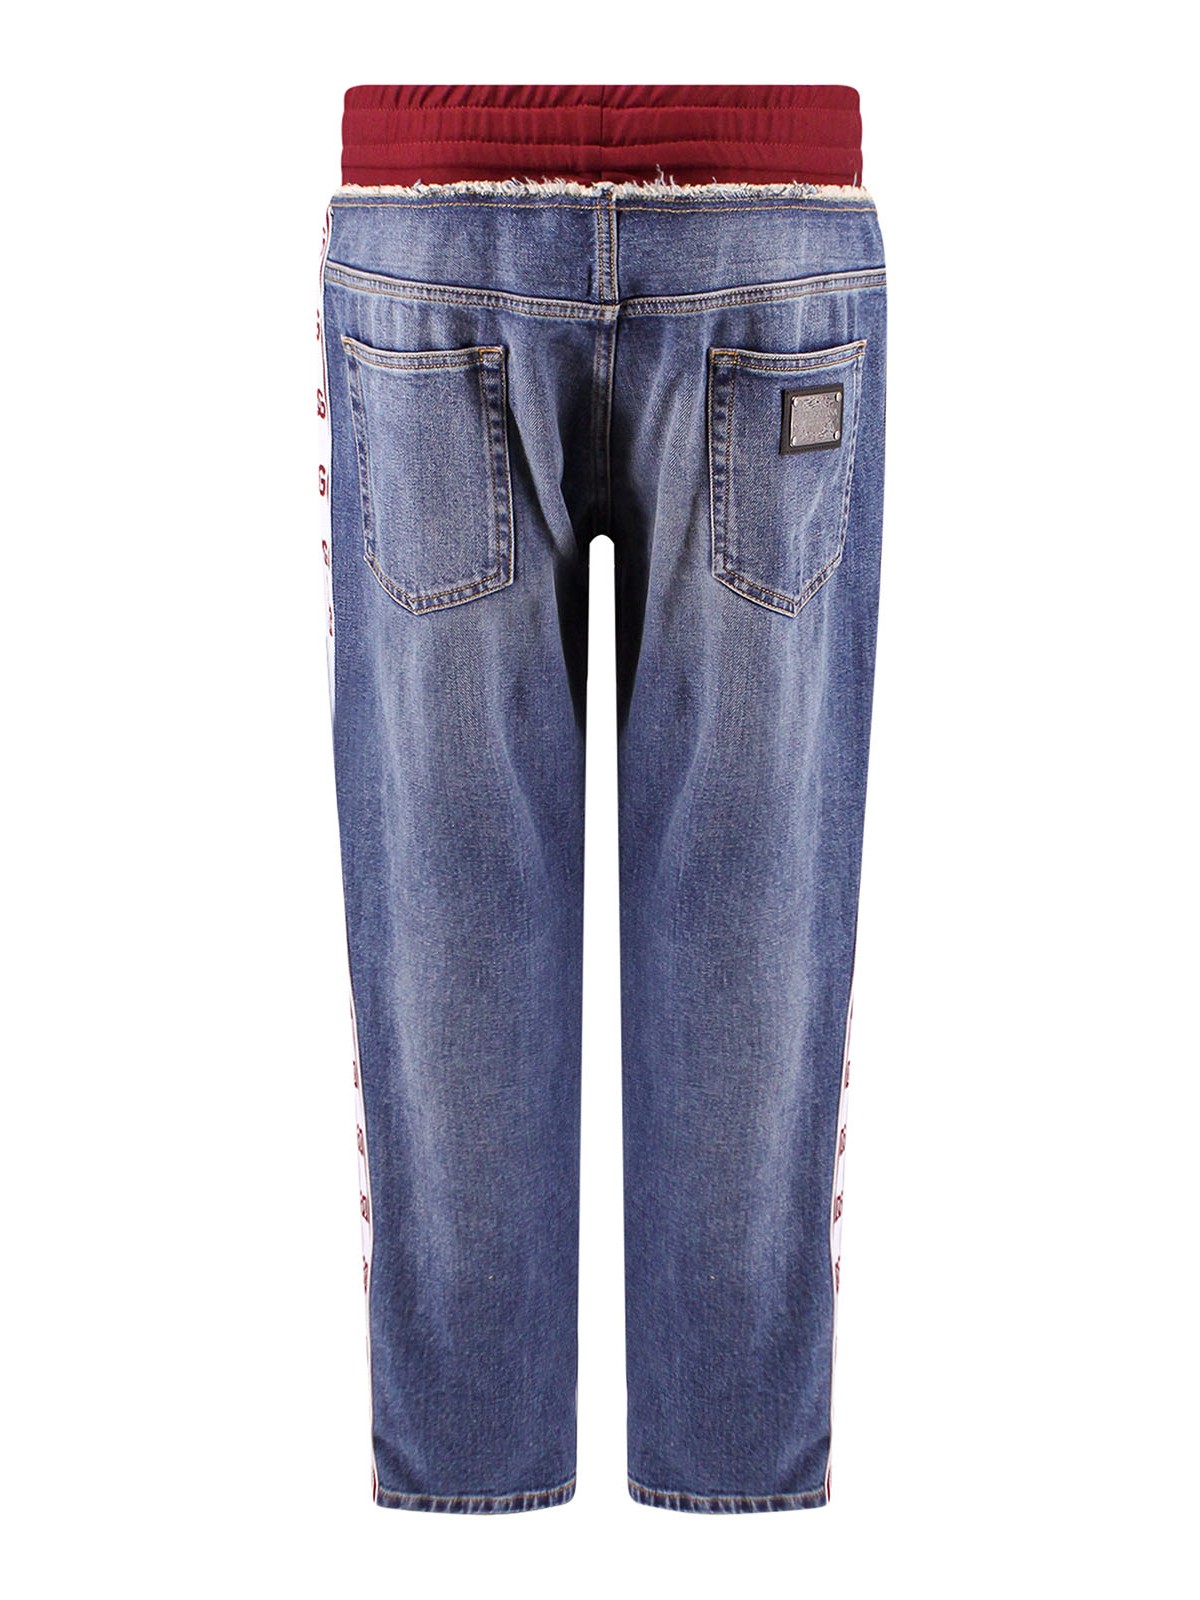 Rafflesia Arnoldi Namaak Woedend Straight leg jeans Dolce & Gabbana - Jeans with dg side band -  GVXIADG8HJ3S9001